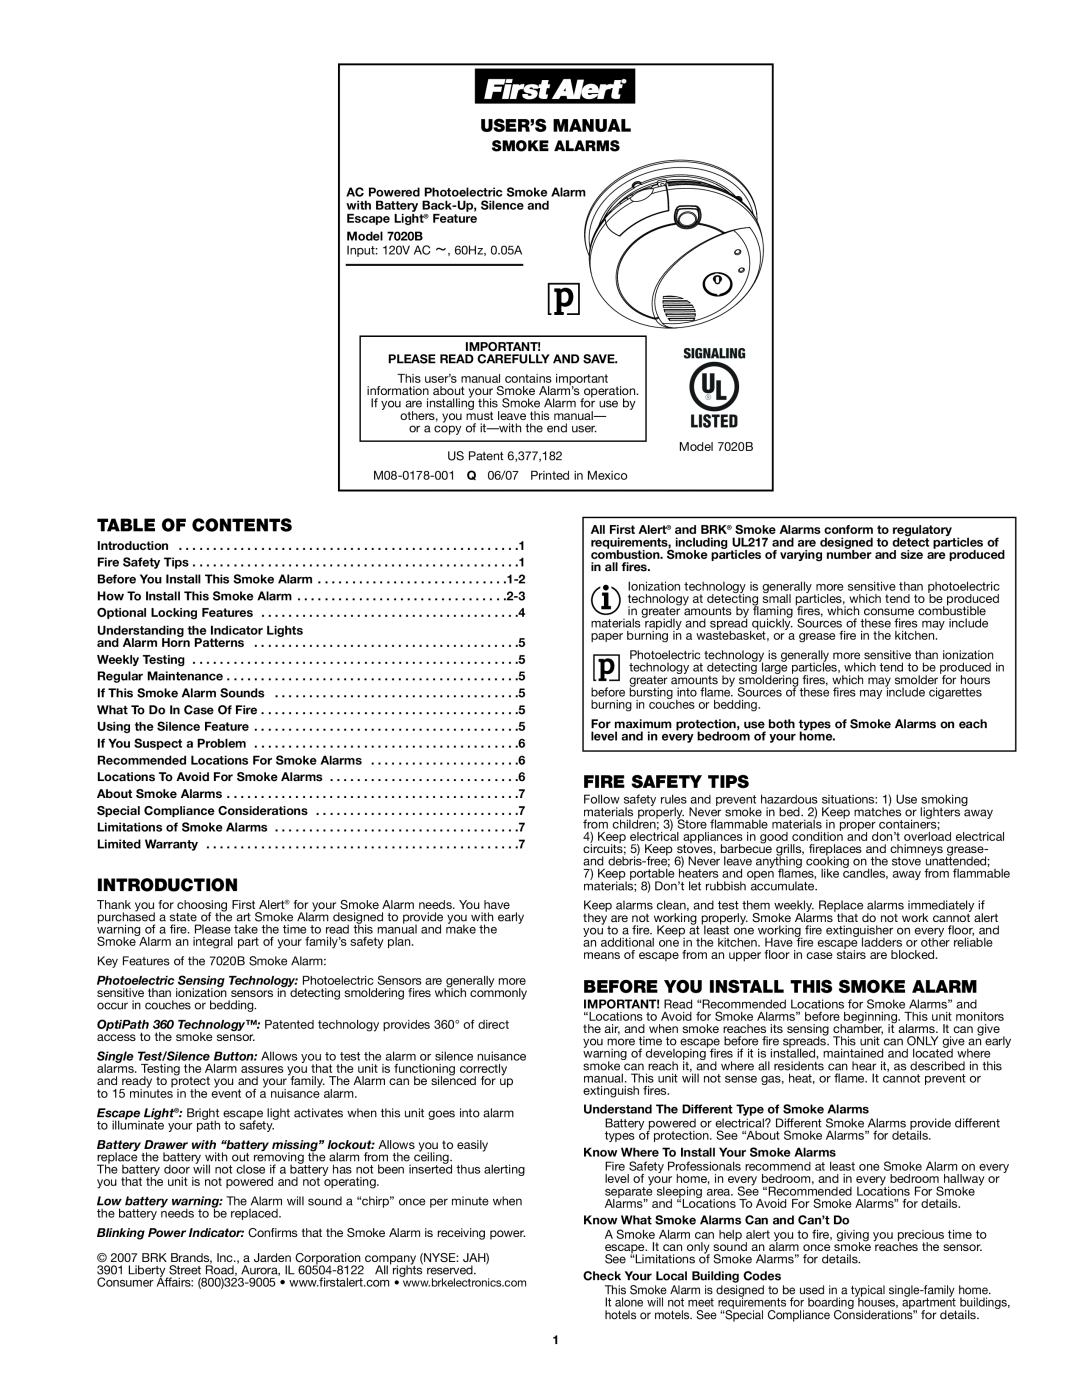 First Alert 7020b user manual Table Of Contents, Introduction, Fire Safety Tips, Before You Install This Smoke Alarm 